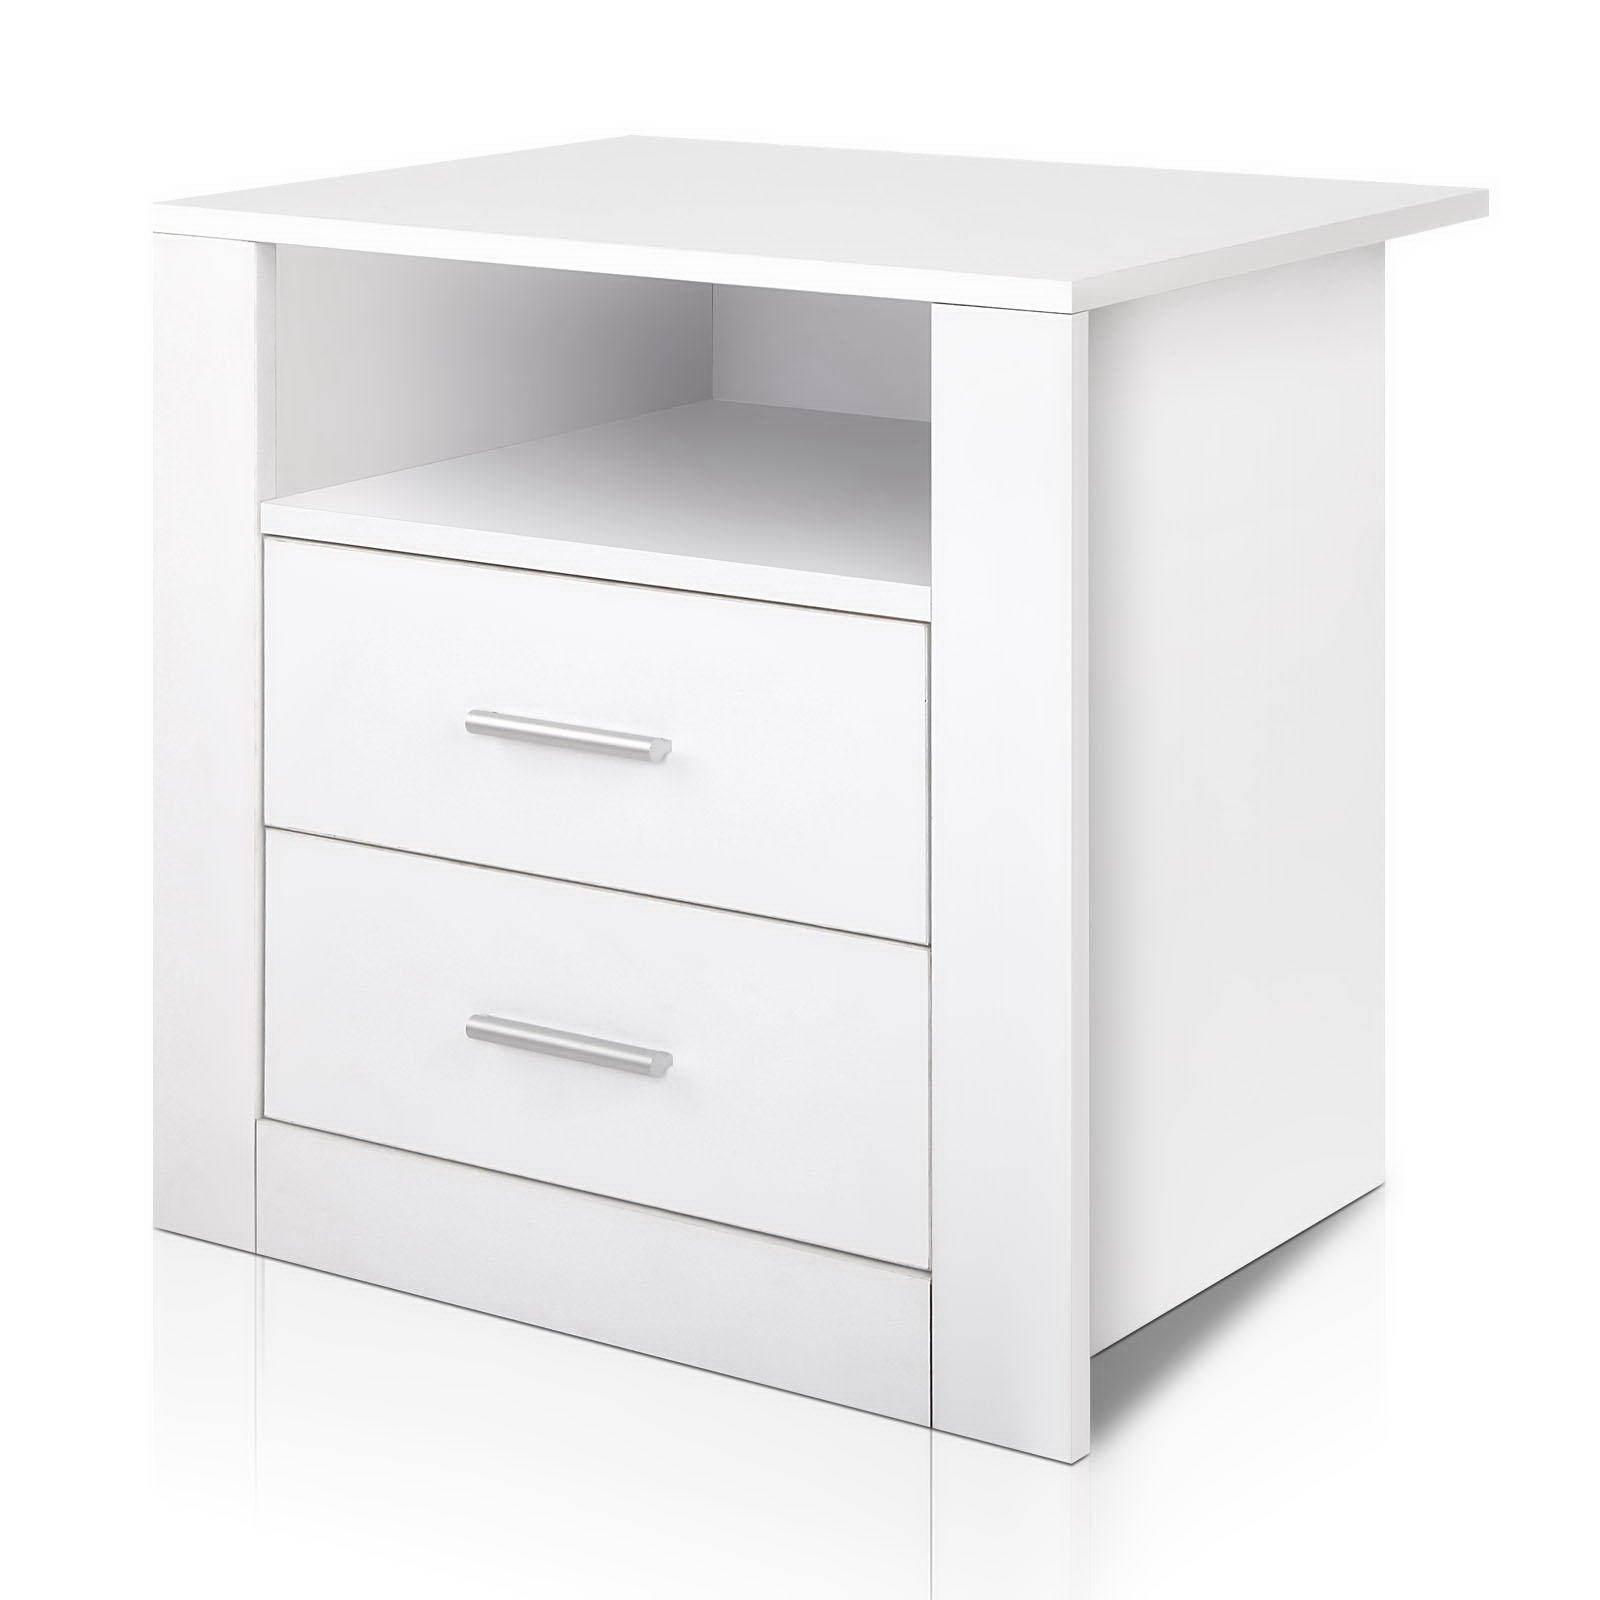 Artiss Bedside Tables Drawers Storage Cabinet Drawers Side Table White - Newstart Furniture